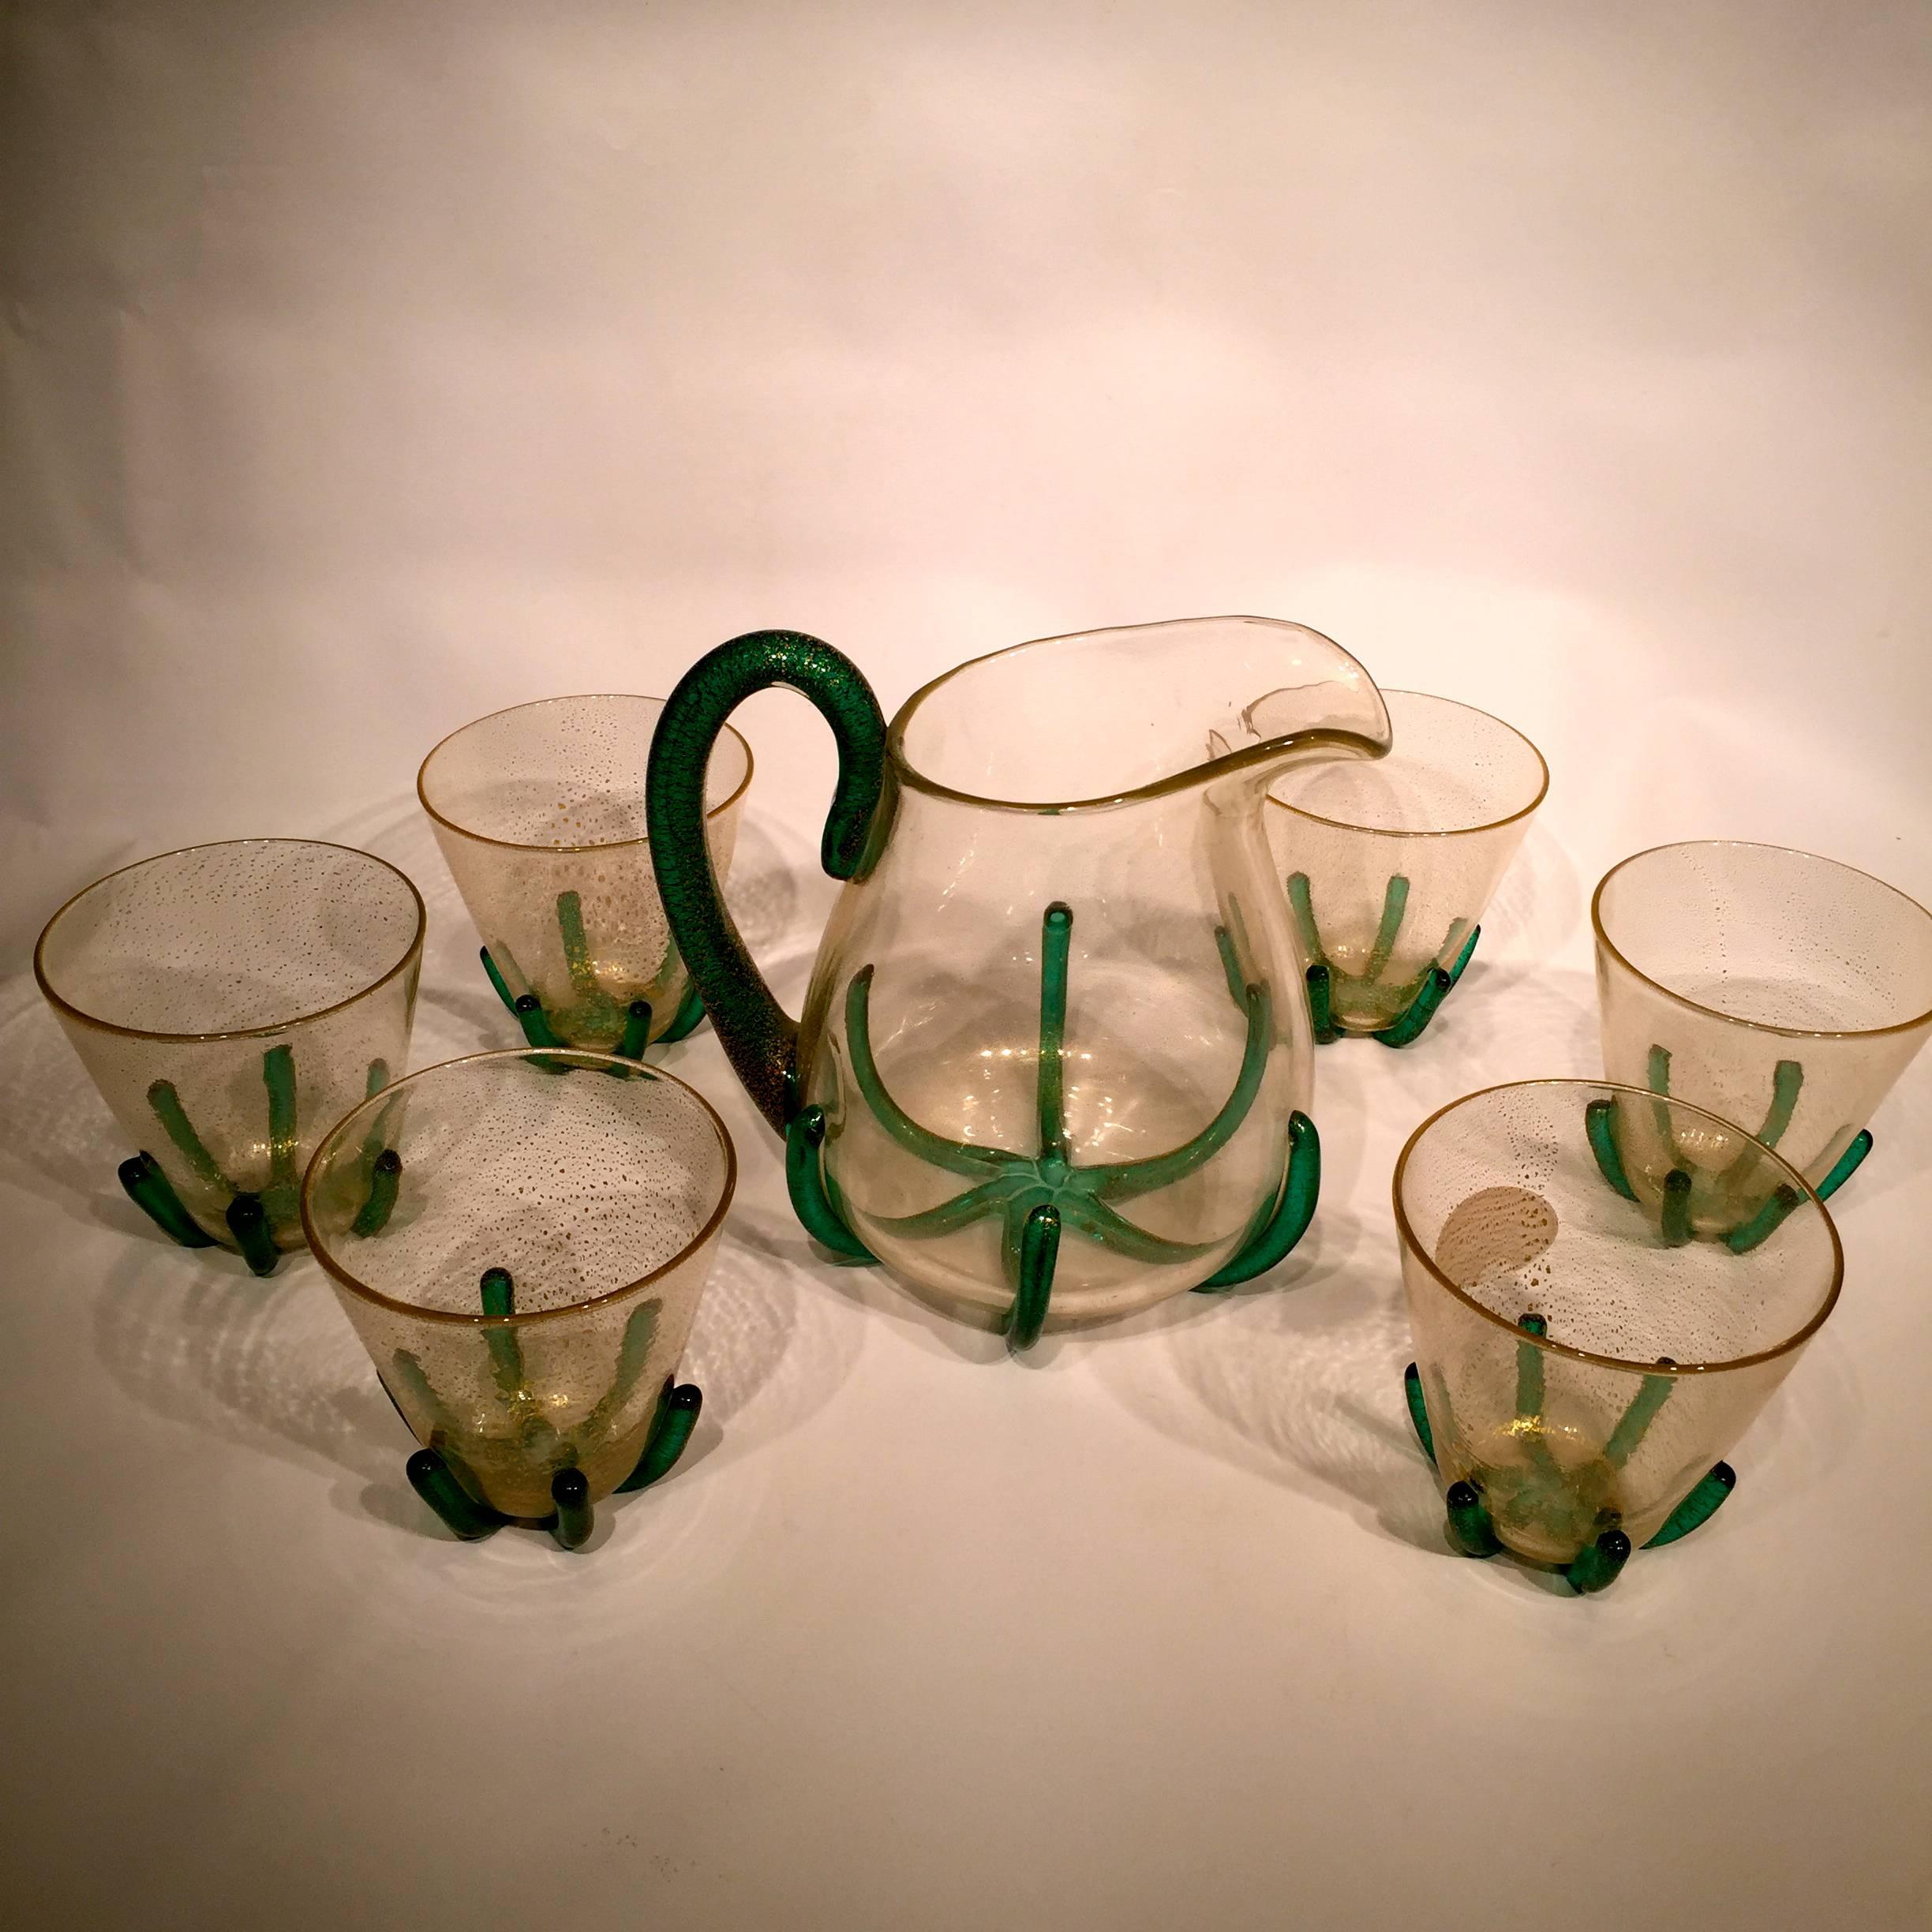 Appliqué Archimede Seguso Jar and Six Glasses in Artistic Blown Glass of Murano, 1950 For Sale